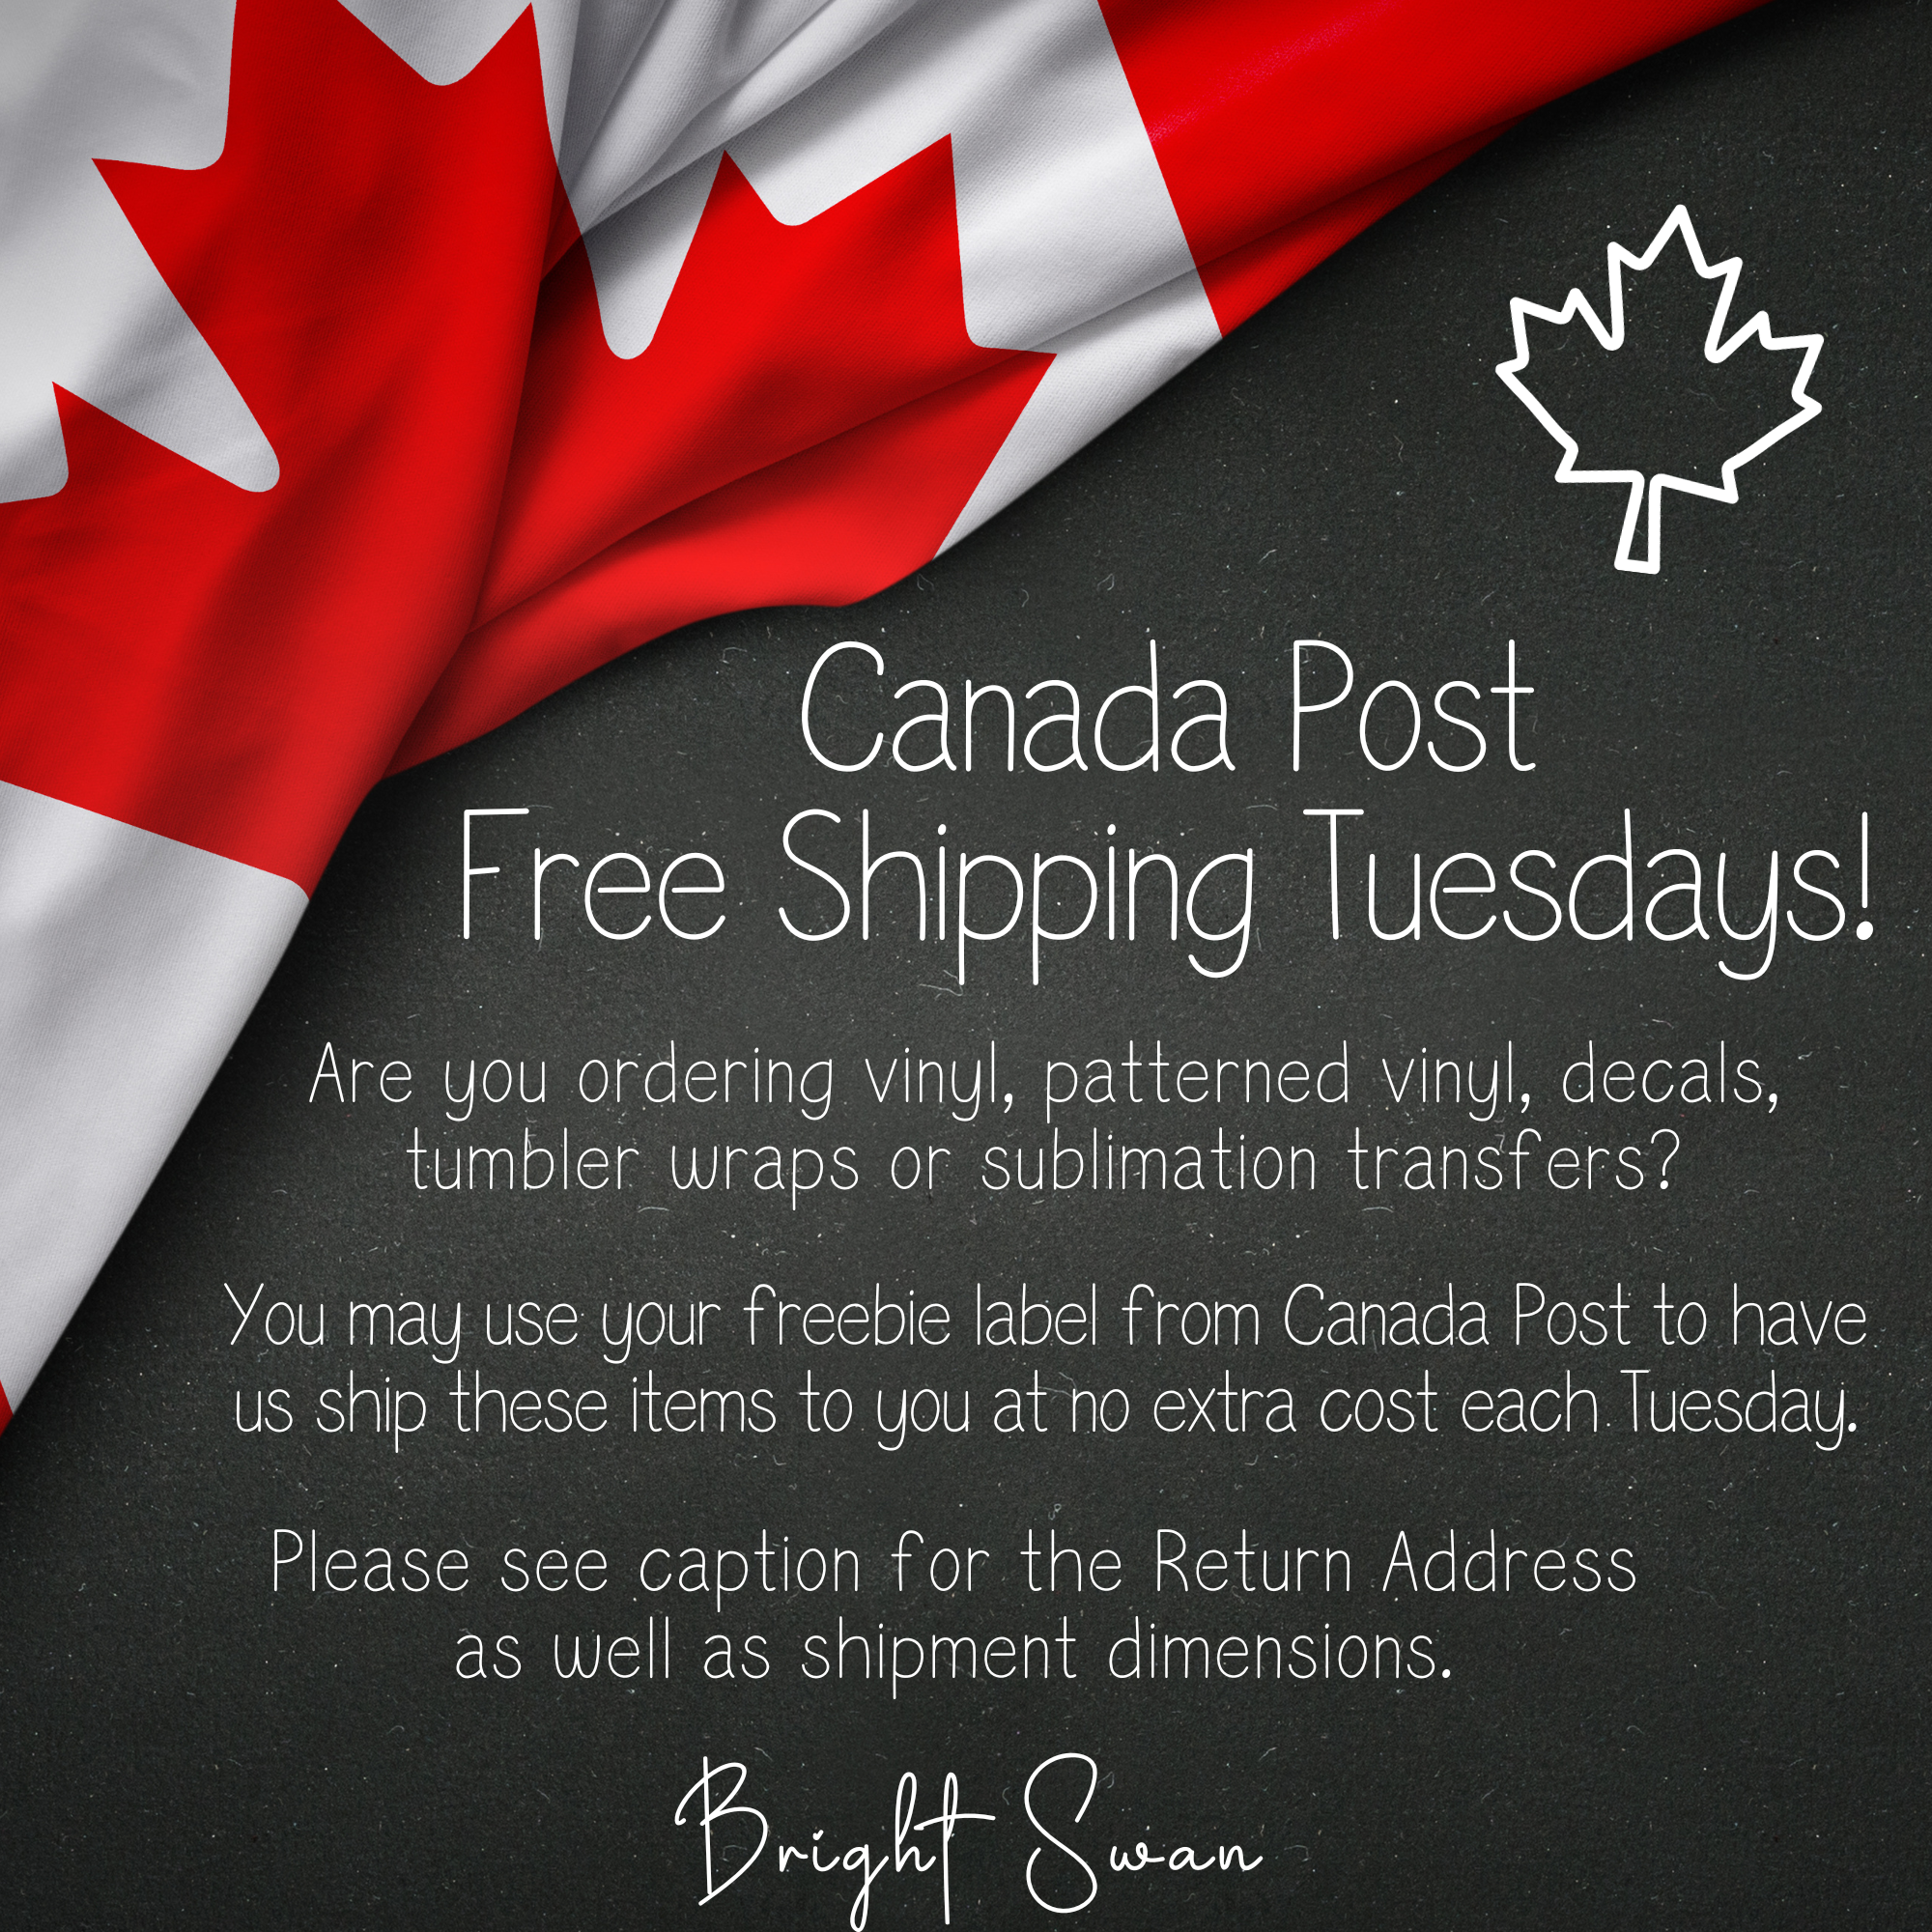 Canadians - Free Shipping Tuesdays are back!